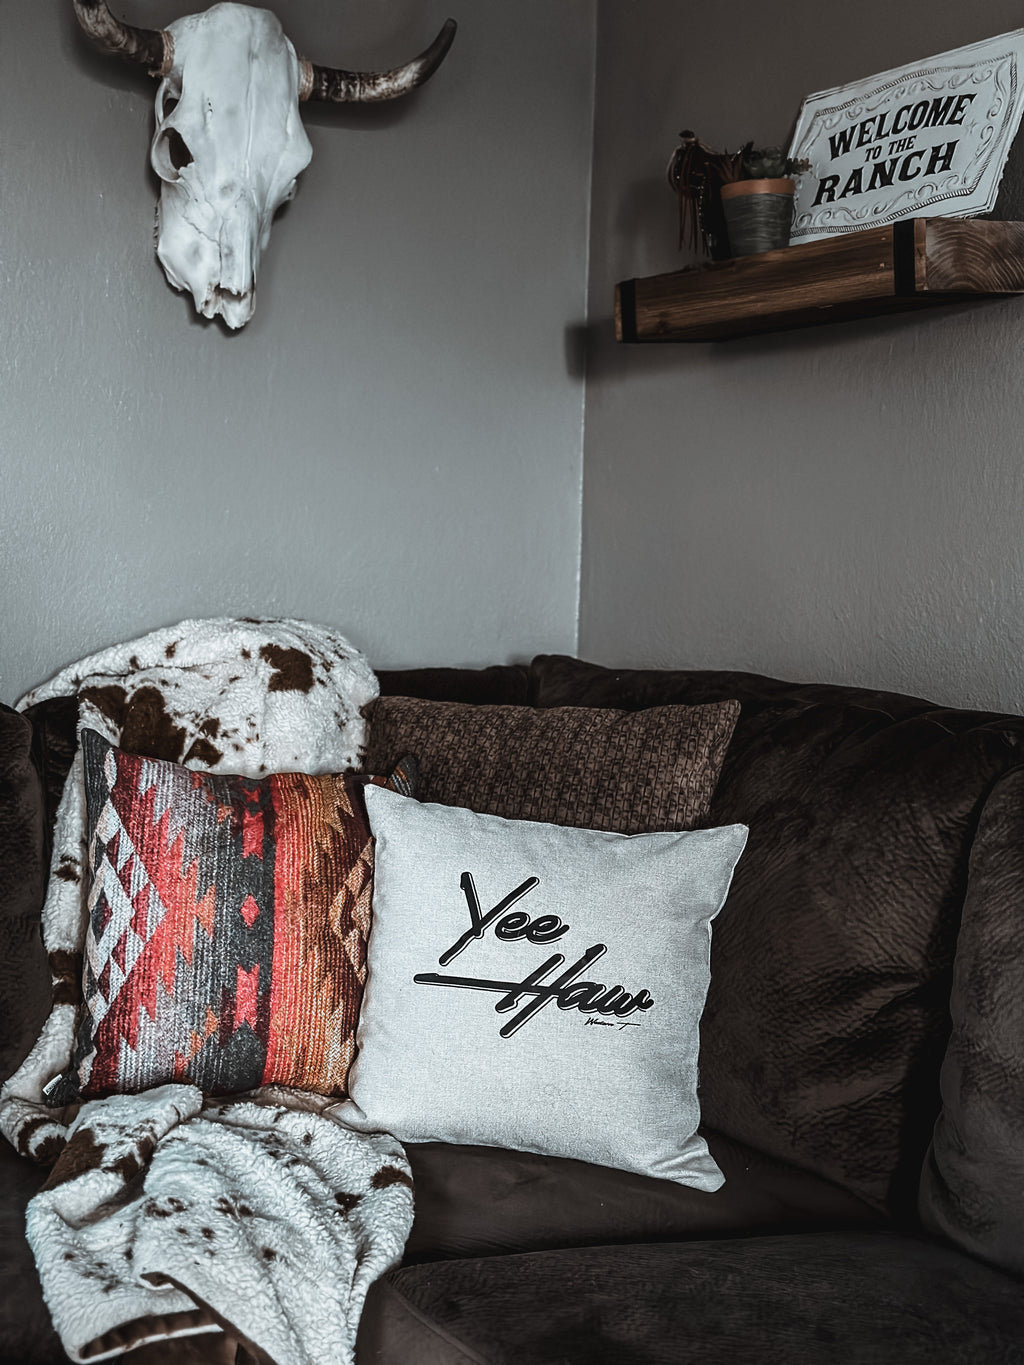 Yee Haw Pillow Cover